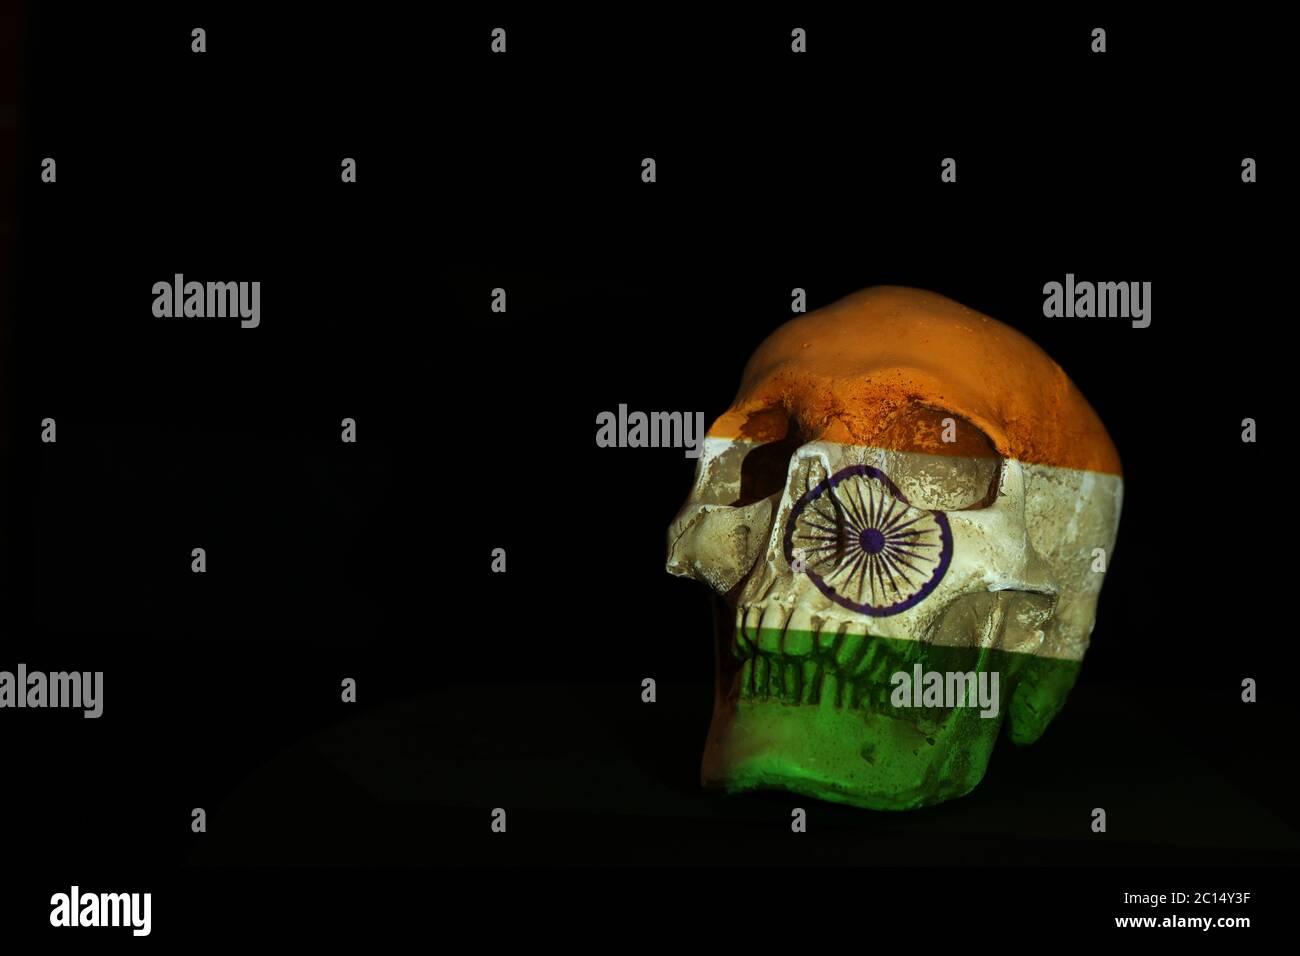 An isolated skull against a black background with the Indian flag projected or draped over it. Stock Photo